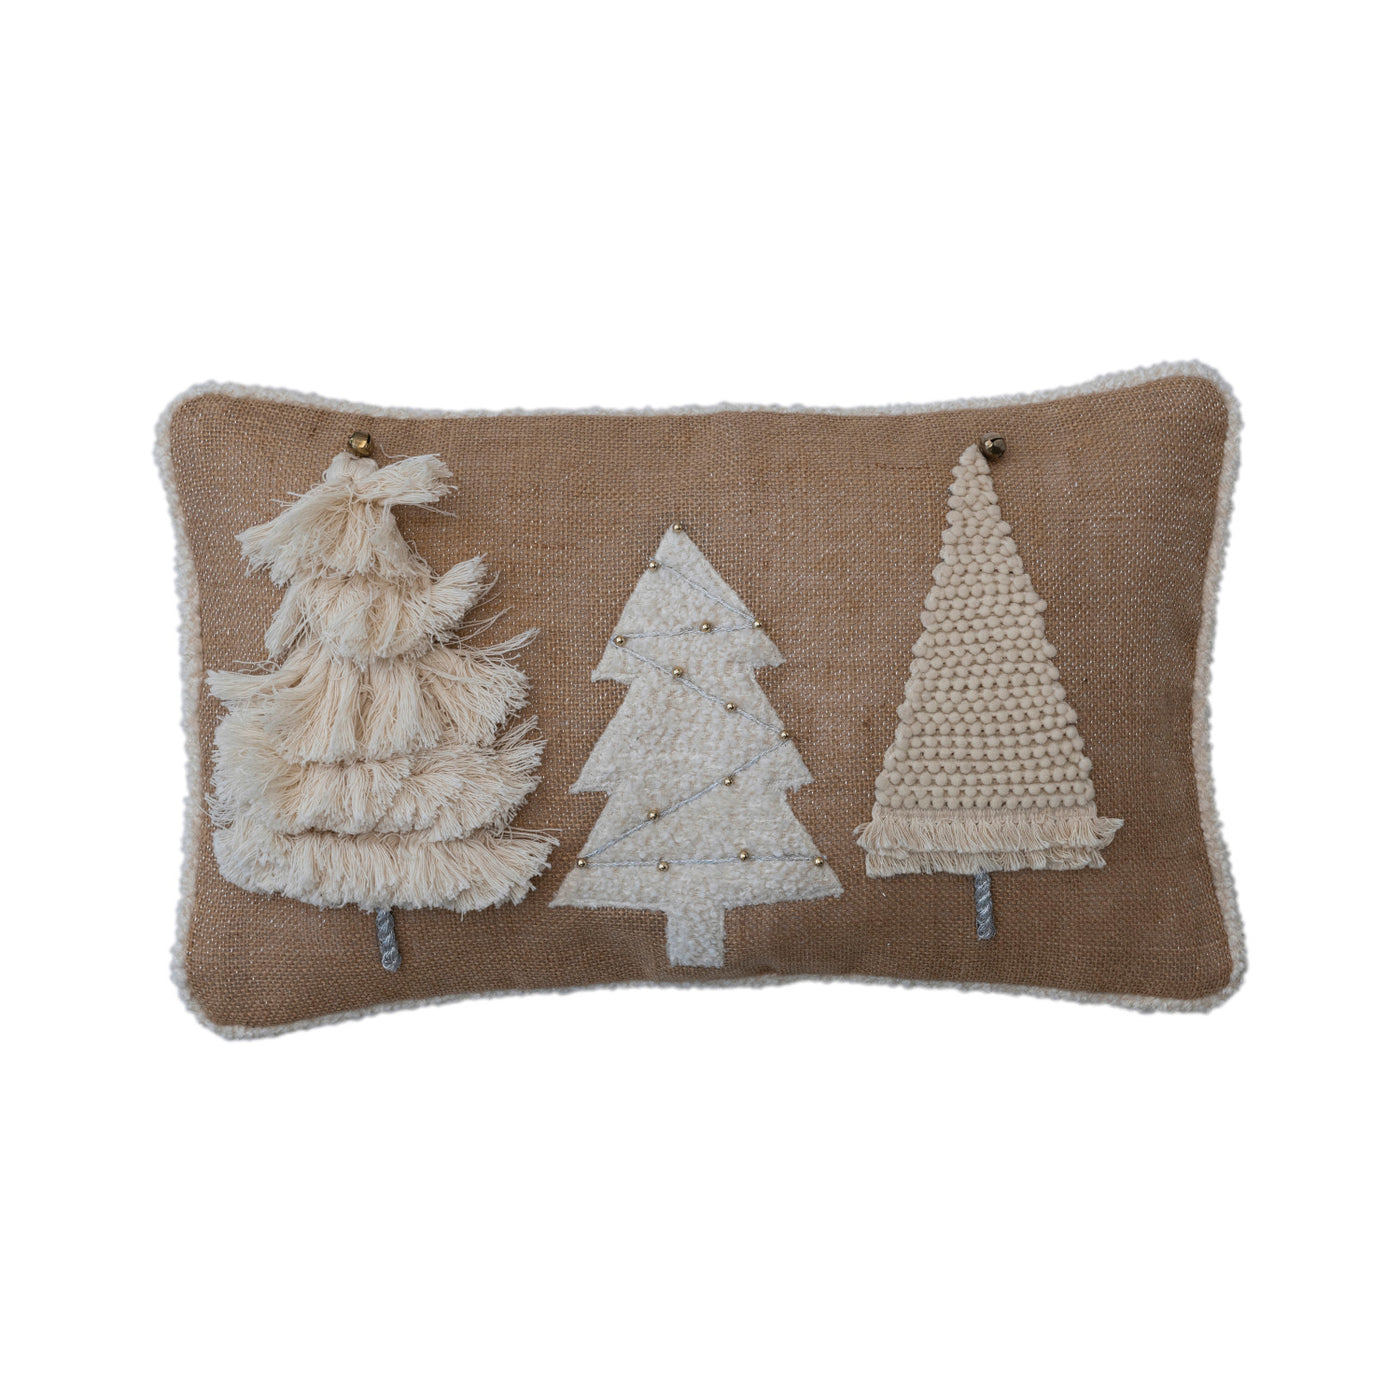 Embroidered Tree Pillow- Natural & Cream